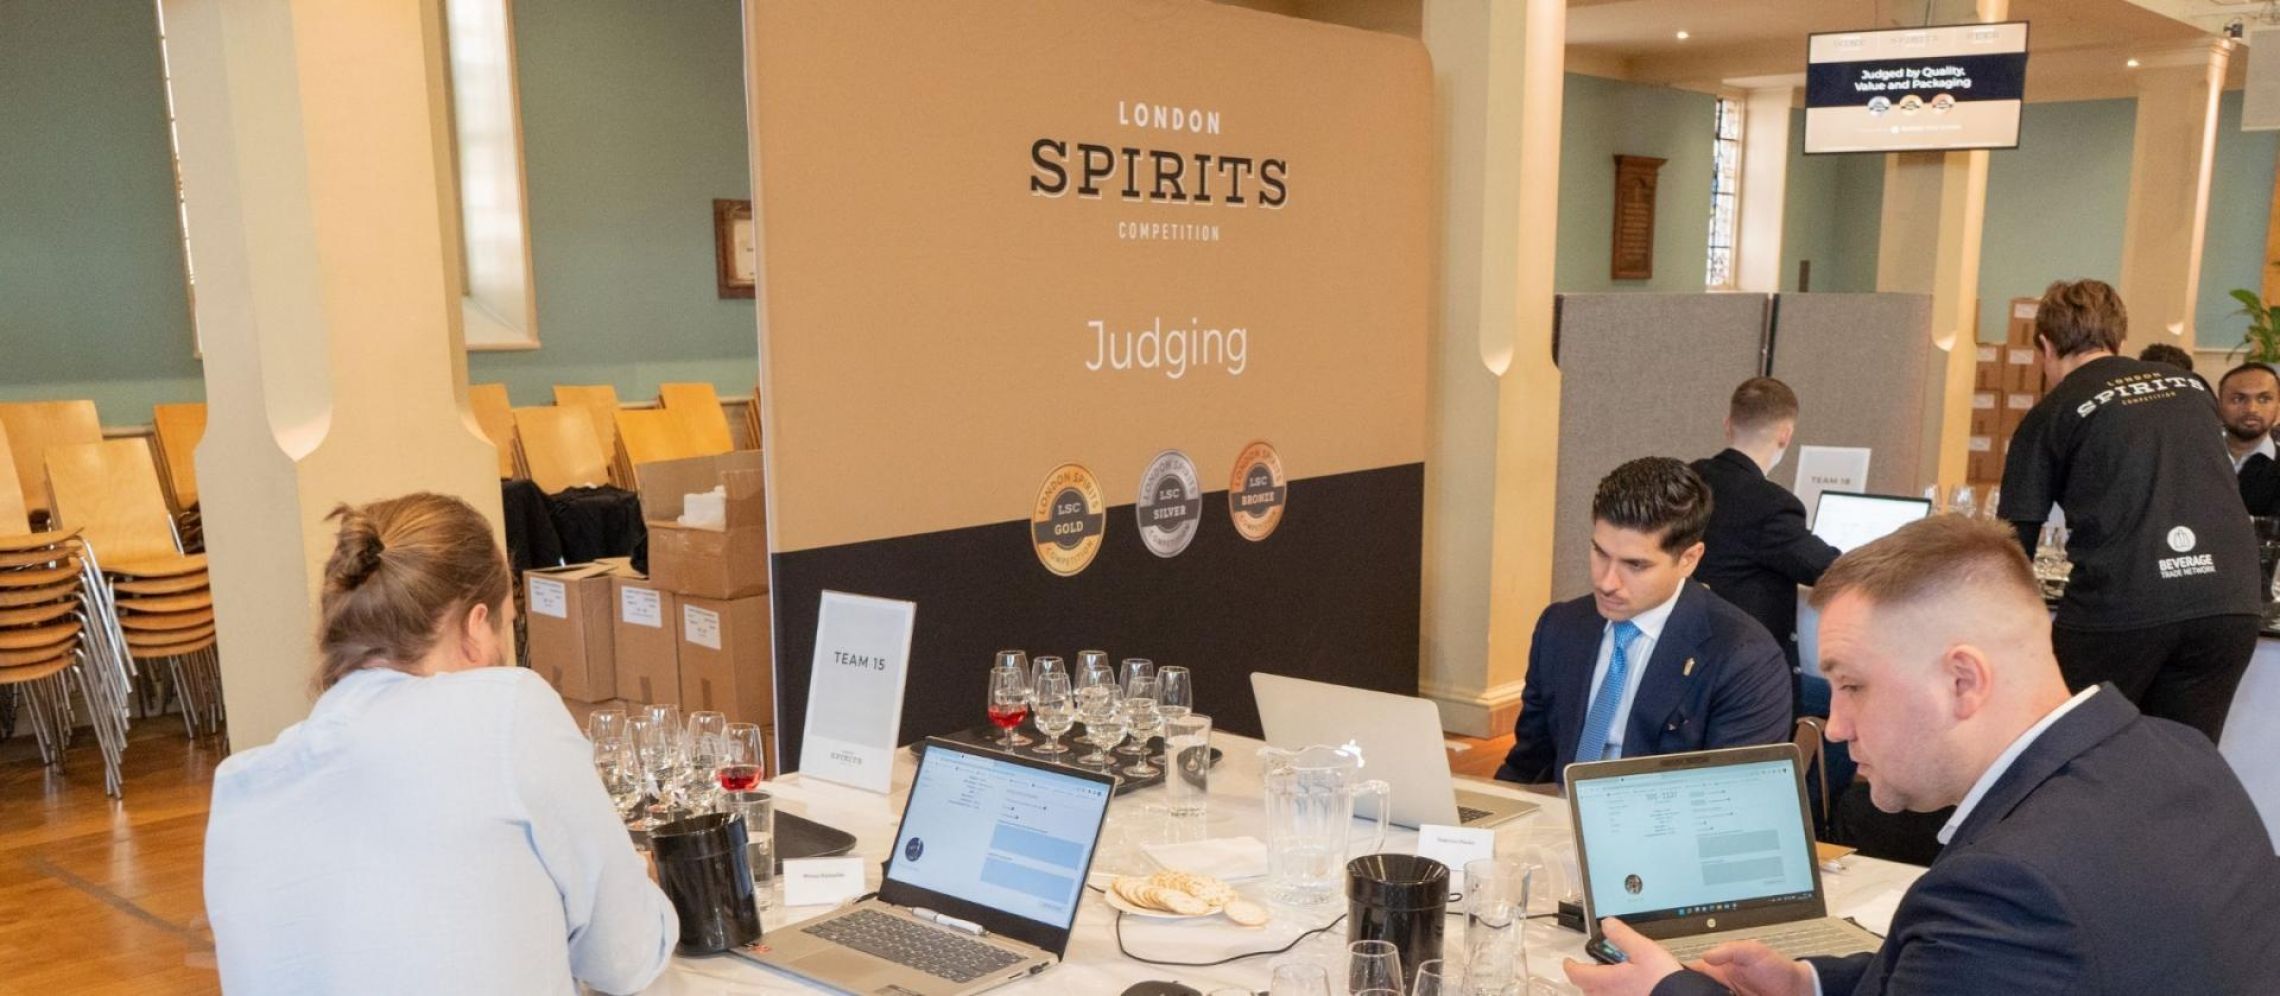 Photo for: Winning big at the London Spirits Competition